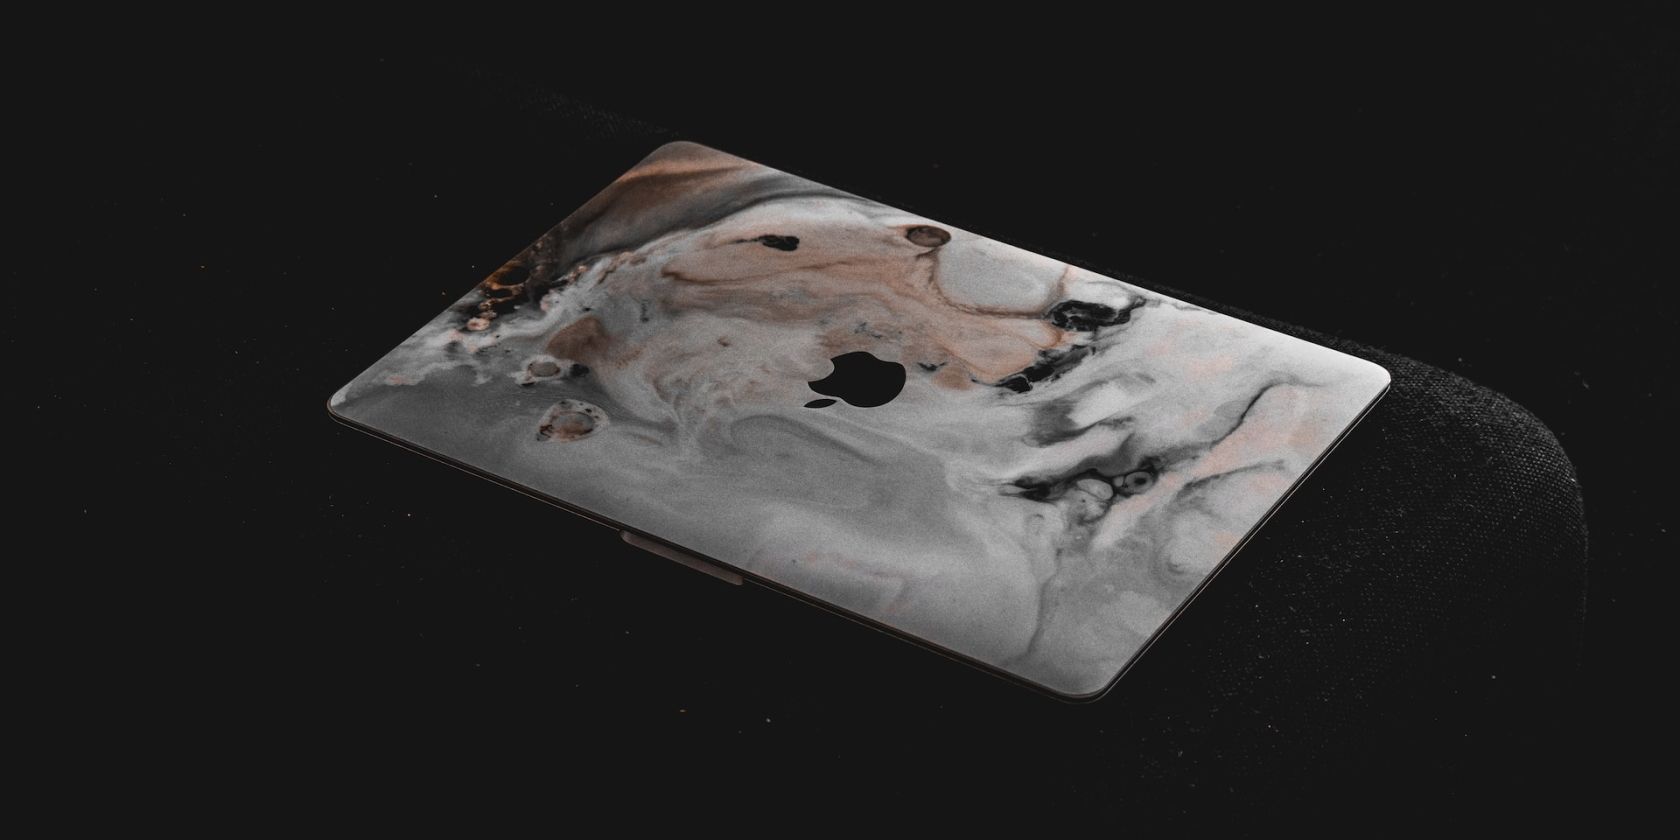 MacBook with a third-party skin